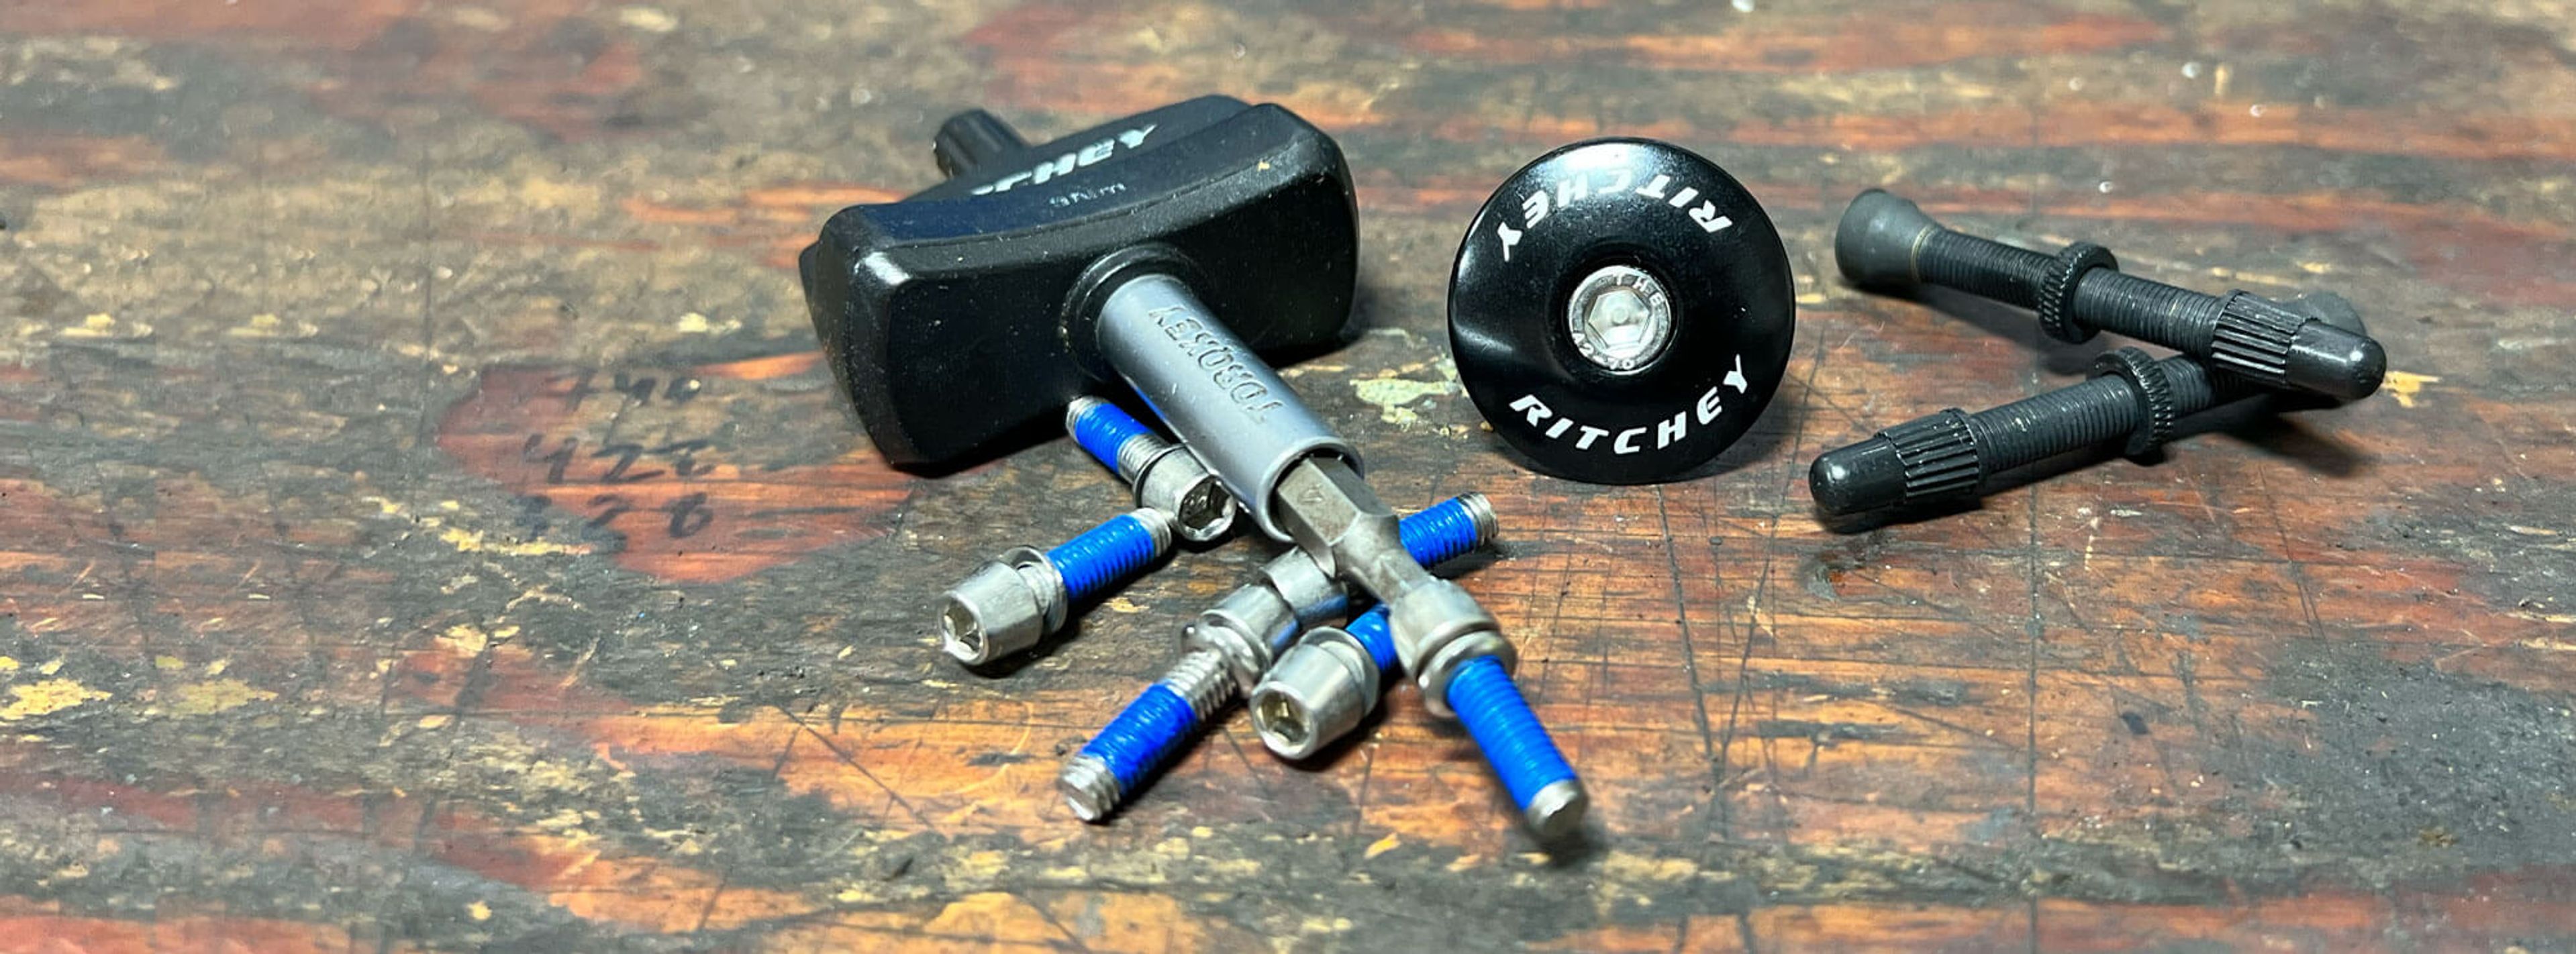 Ritchey small replacement parts